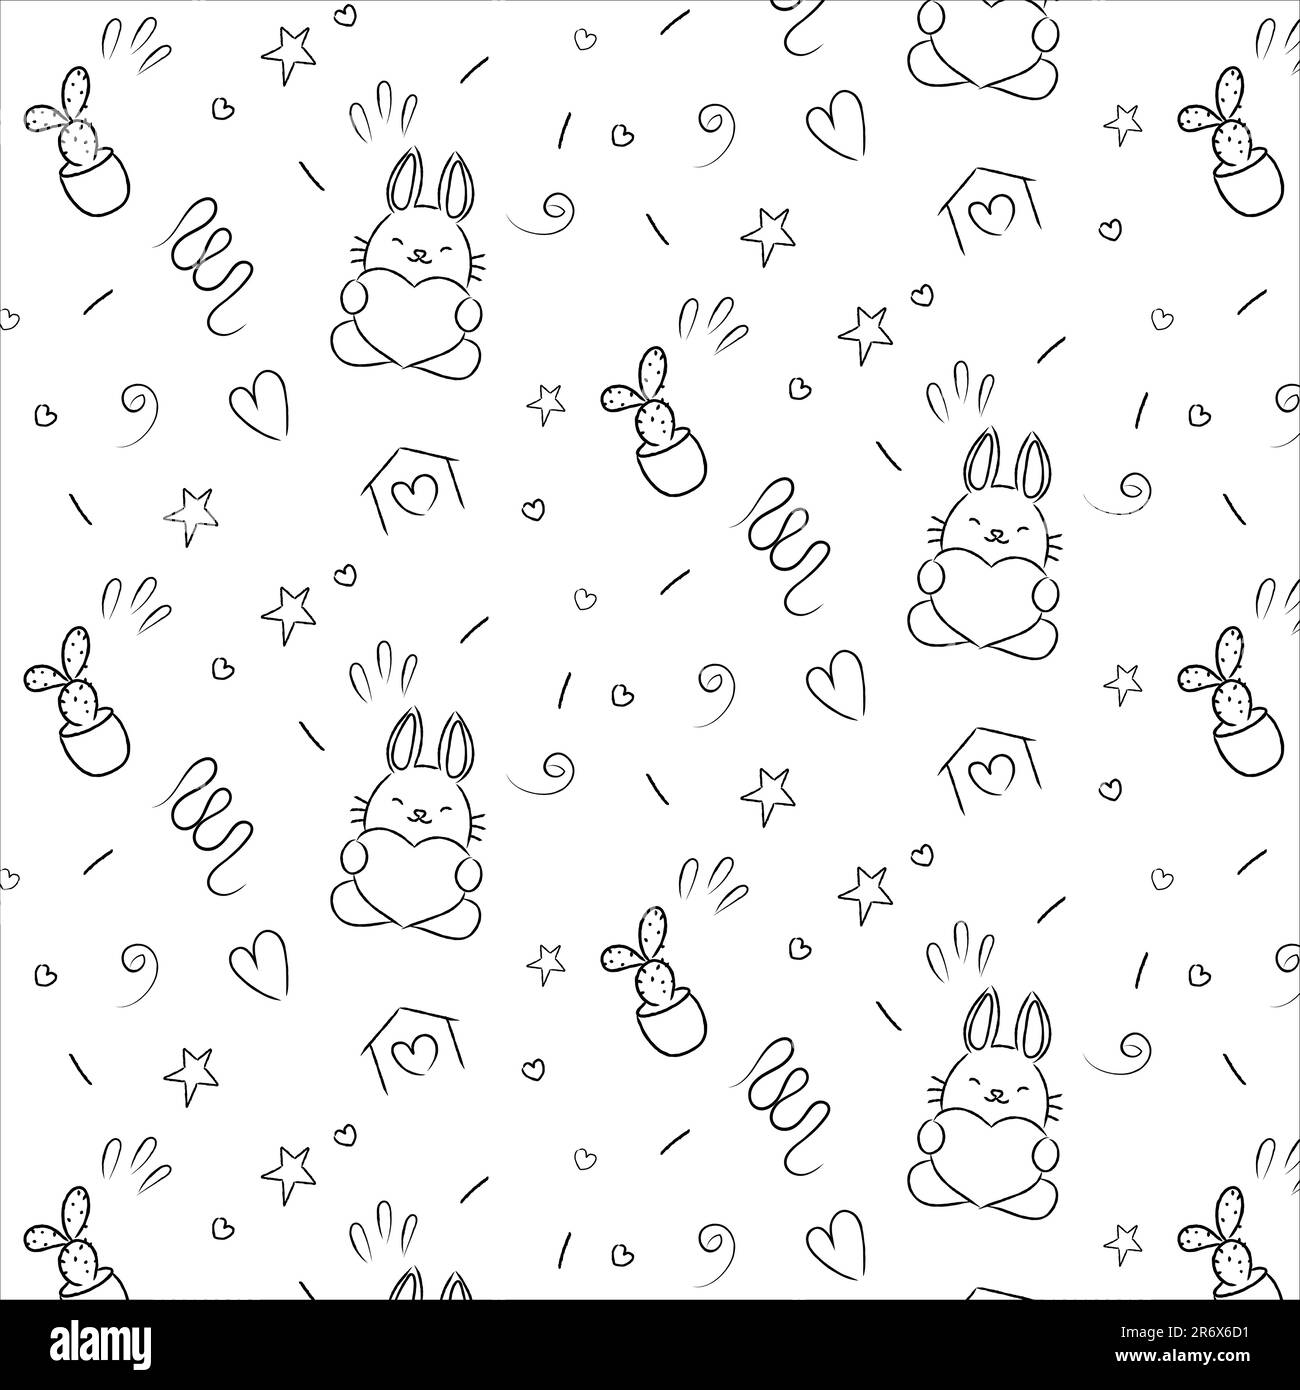 Patter hand-drawn in doodle style, children, drawn: bunny, heart, star, cactus Stock Vector